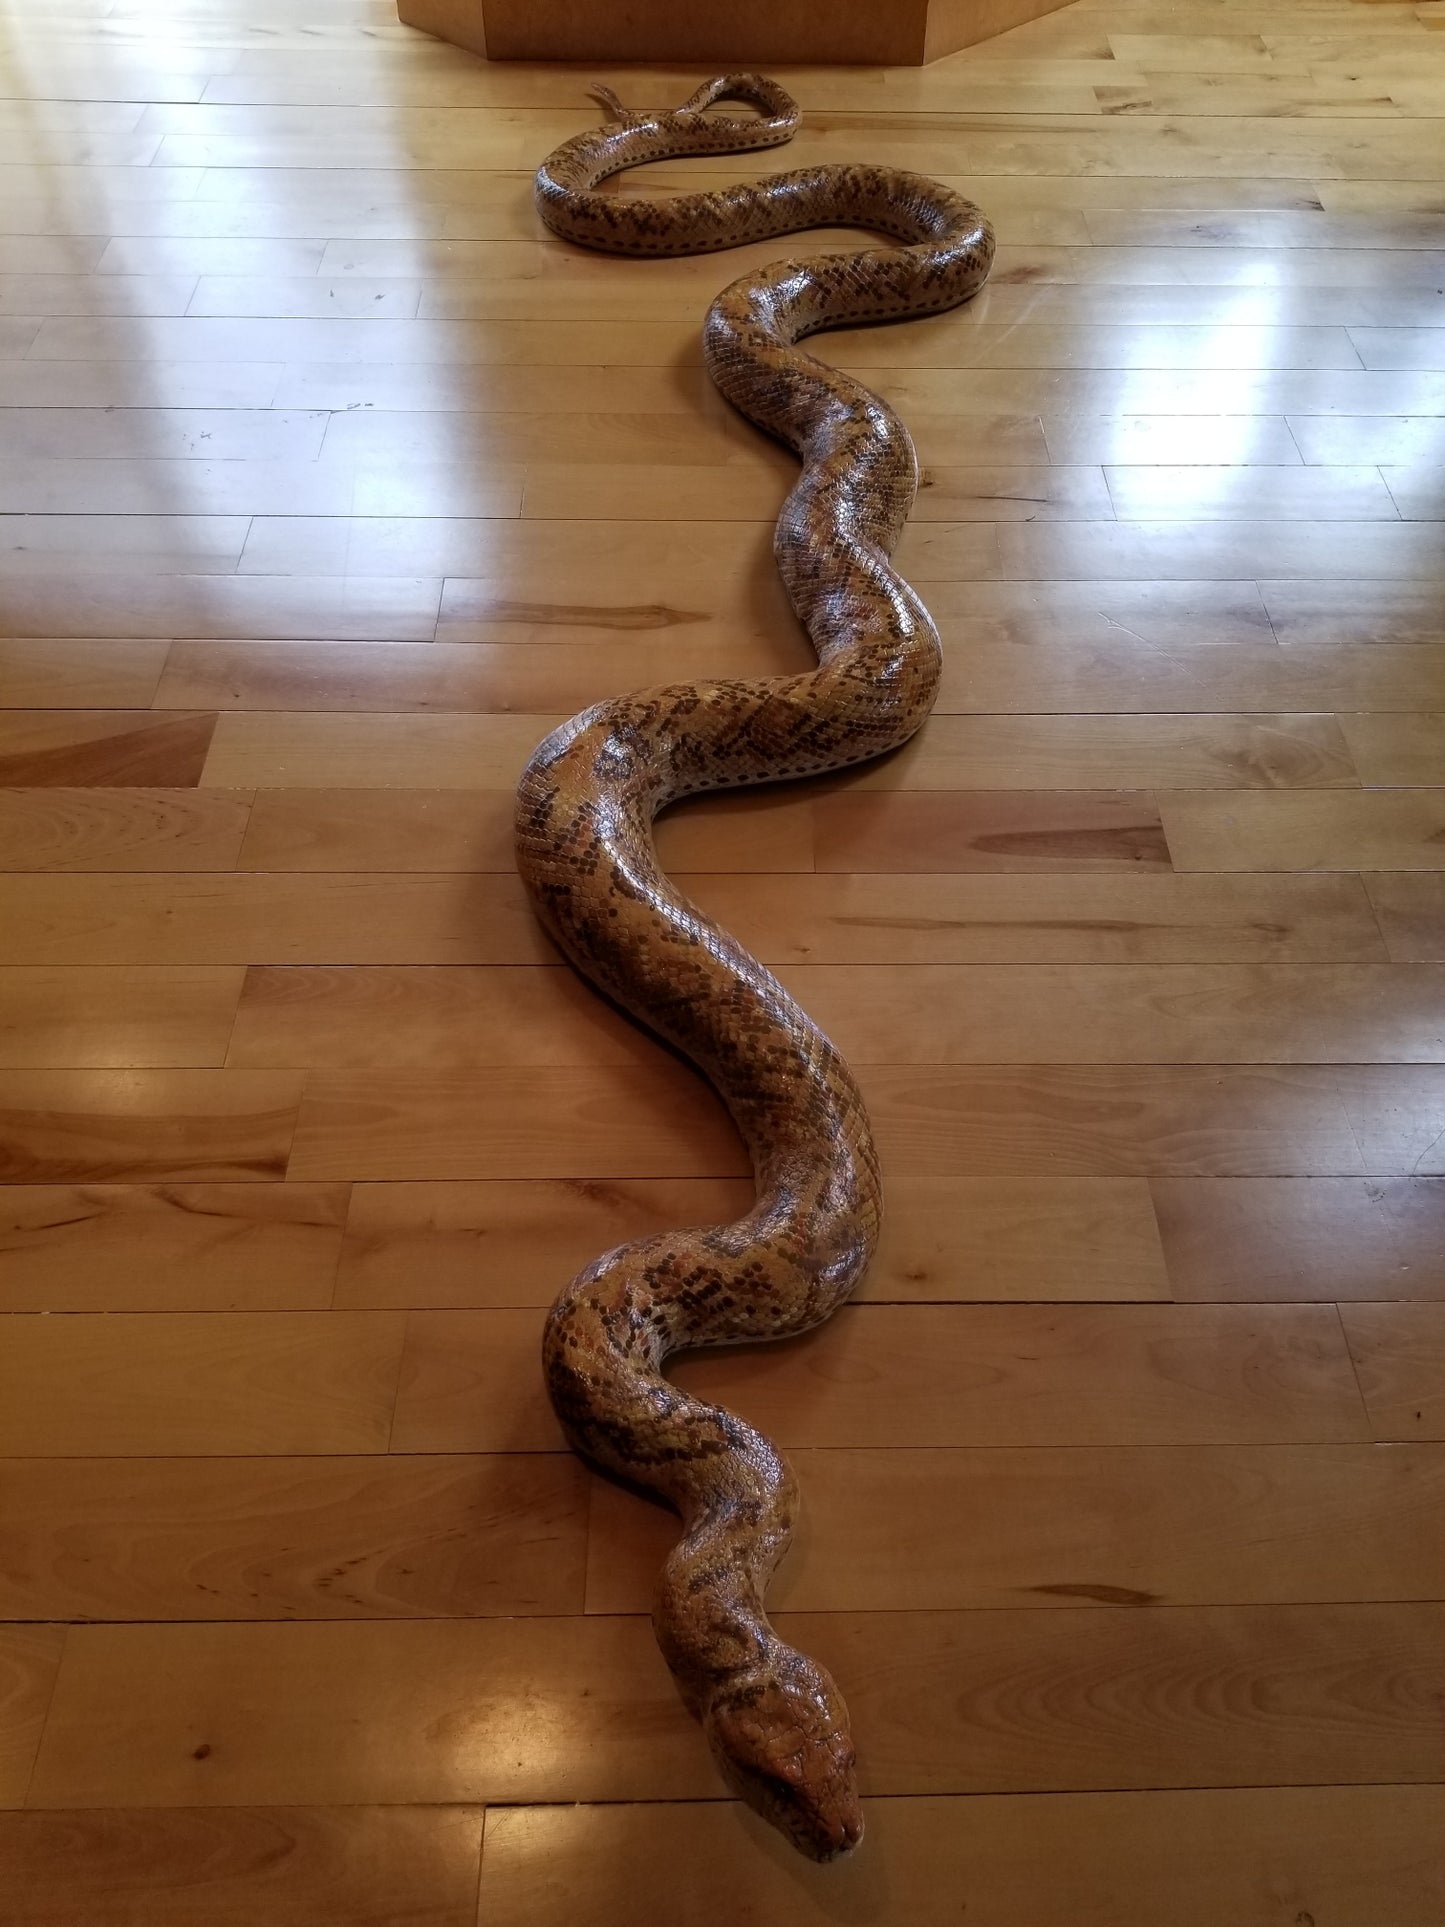 buy a python snake statue at auction